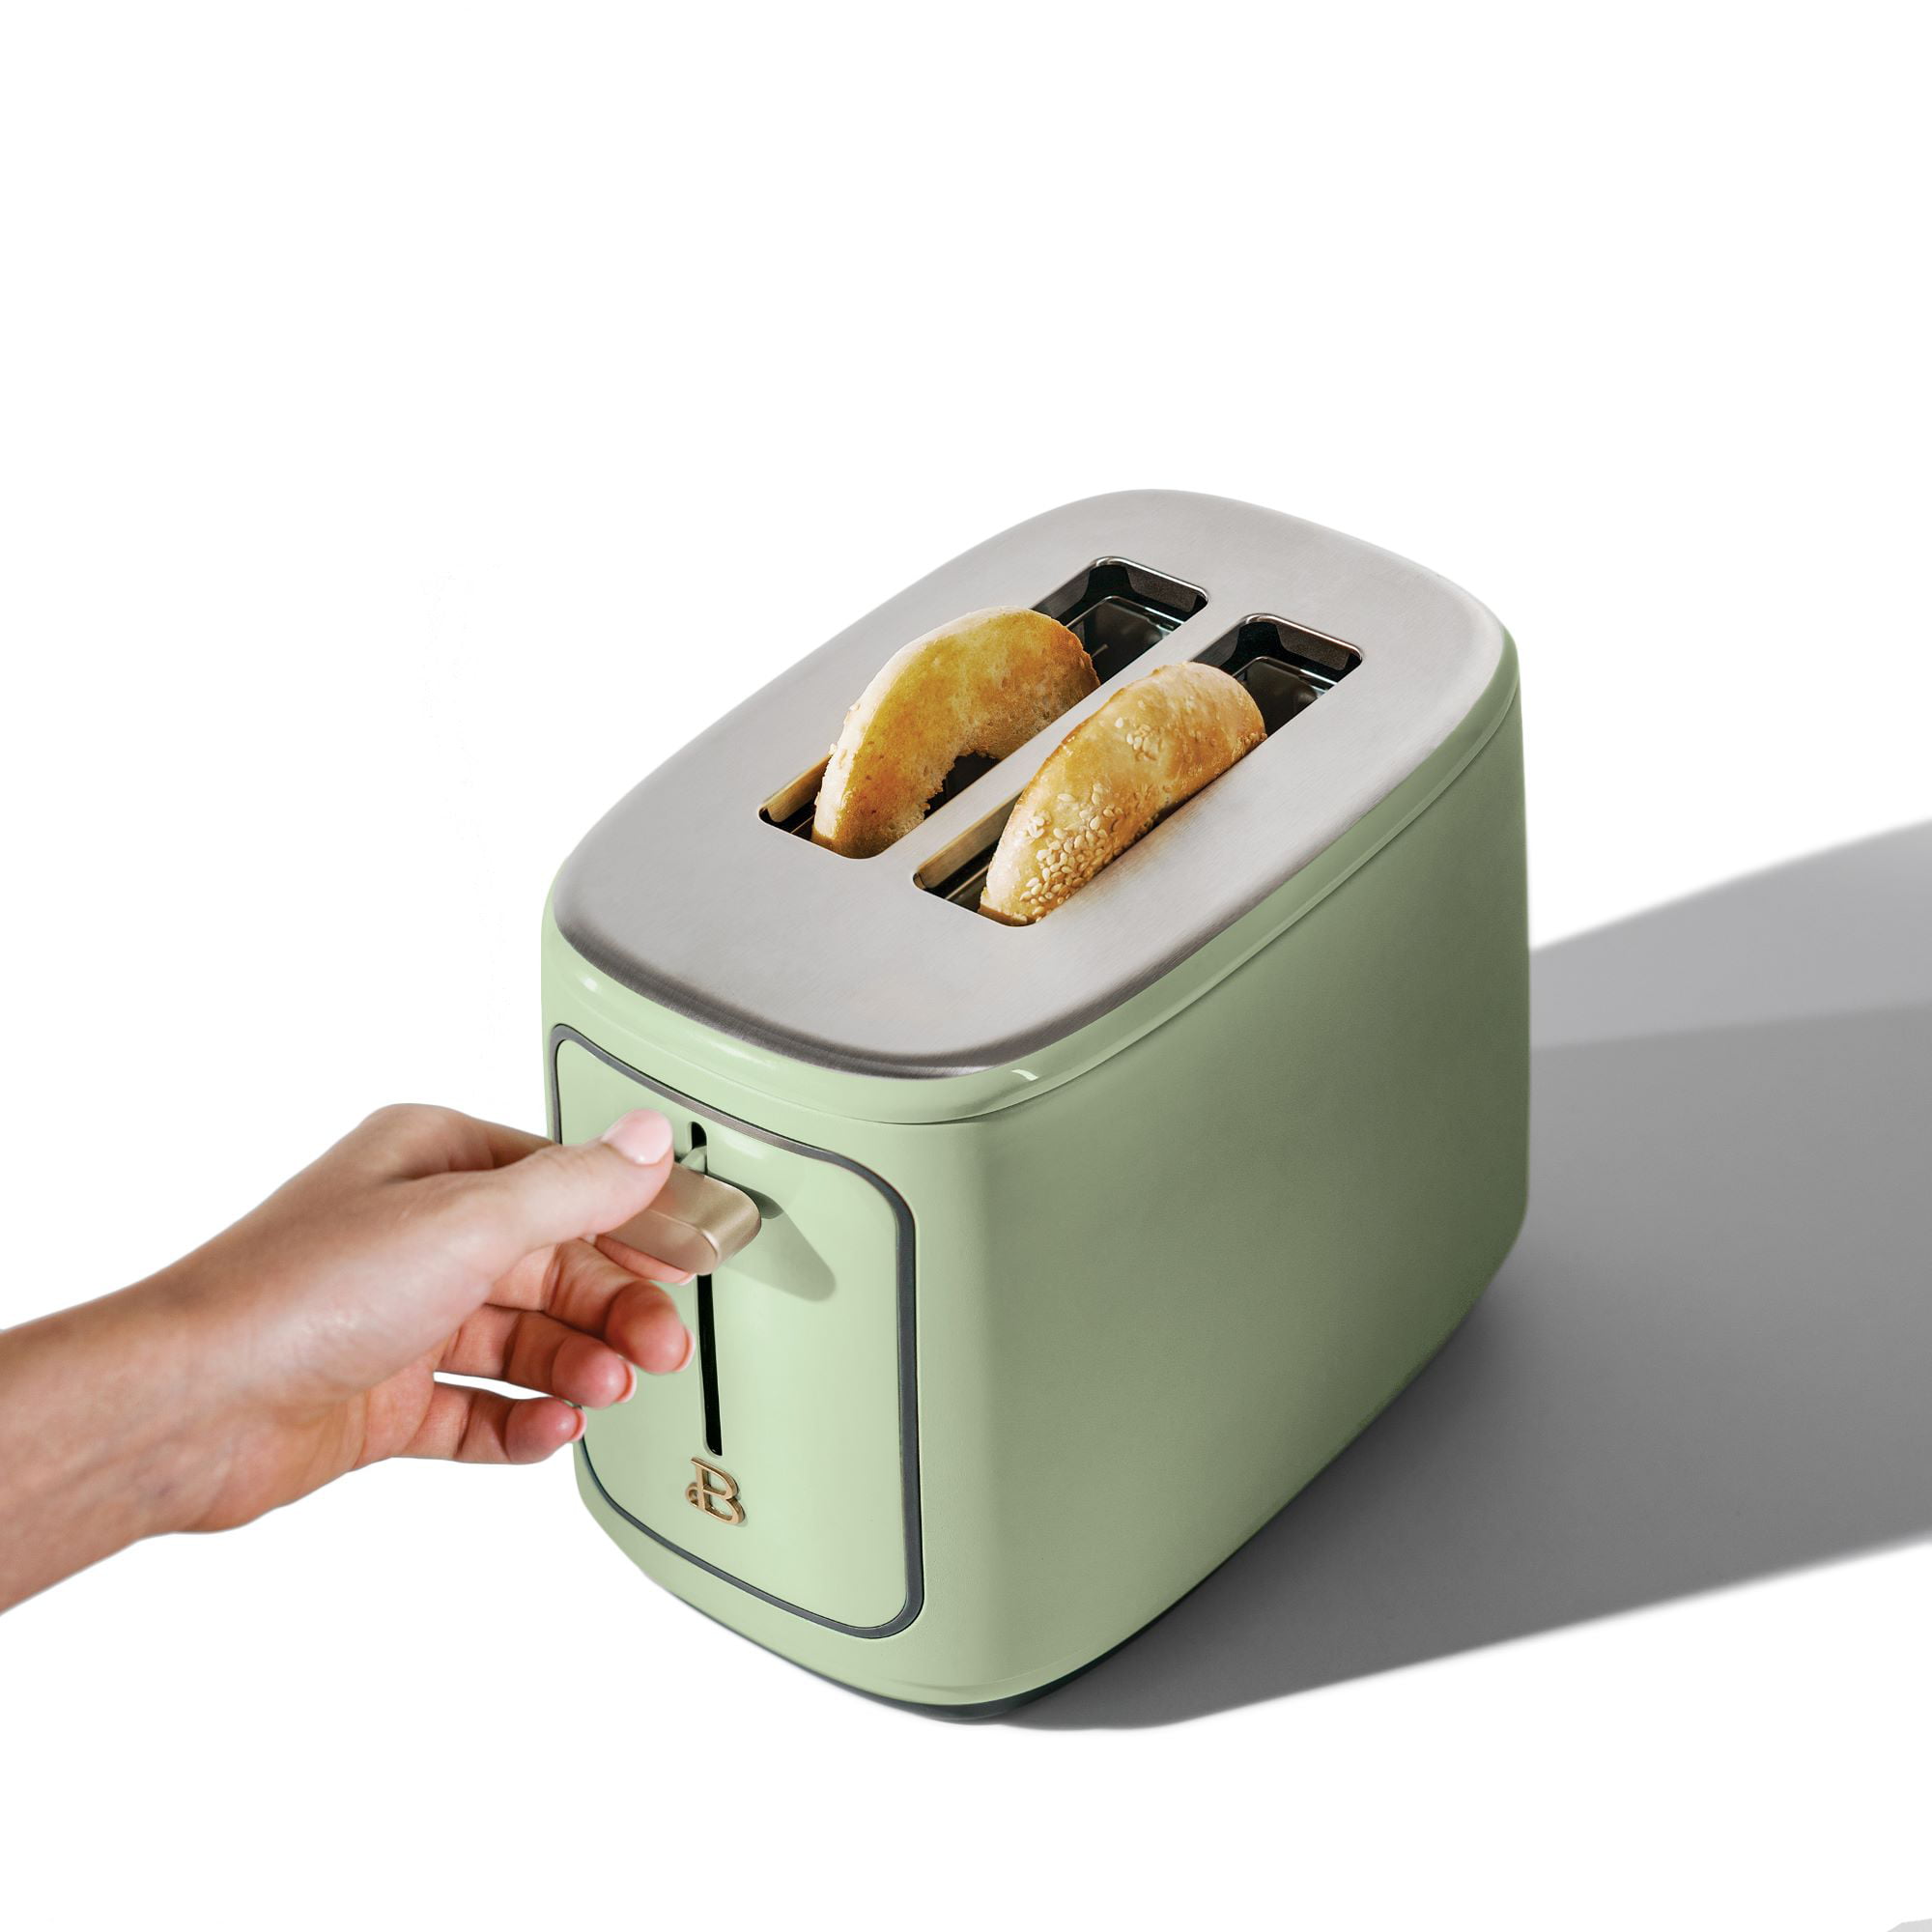 Drew Barrymore Just Launched the Cutest Small Appliances (They're Mint Green!)